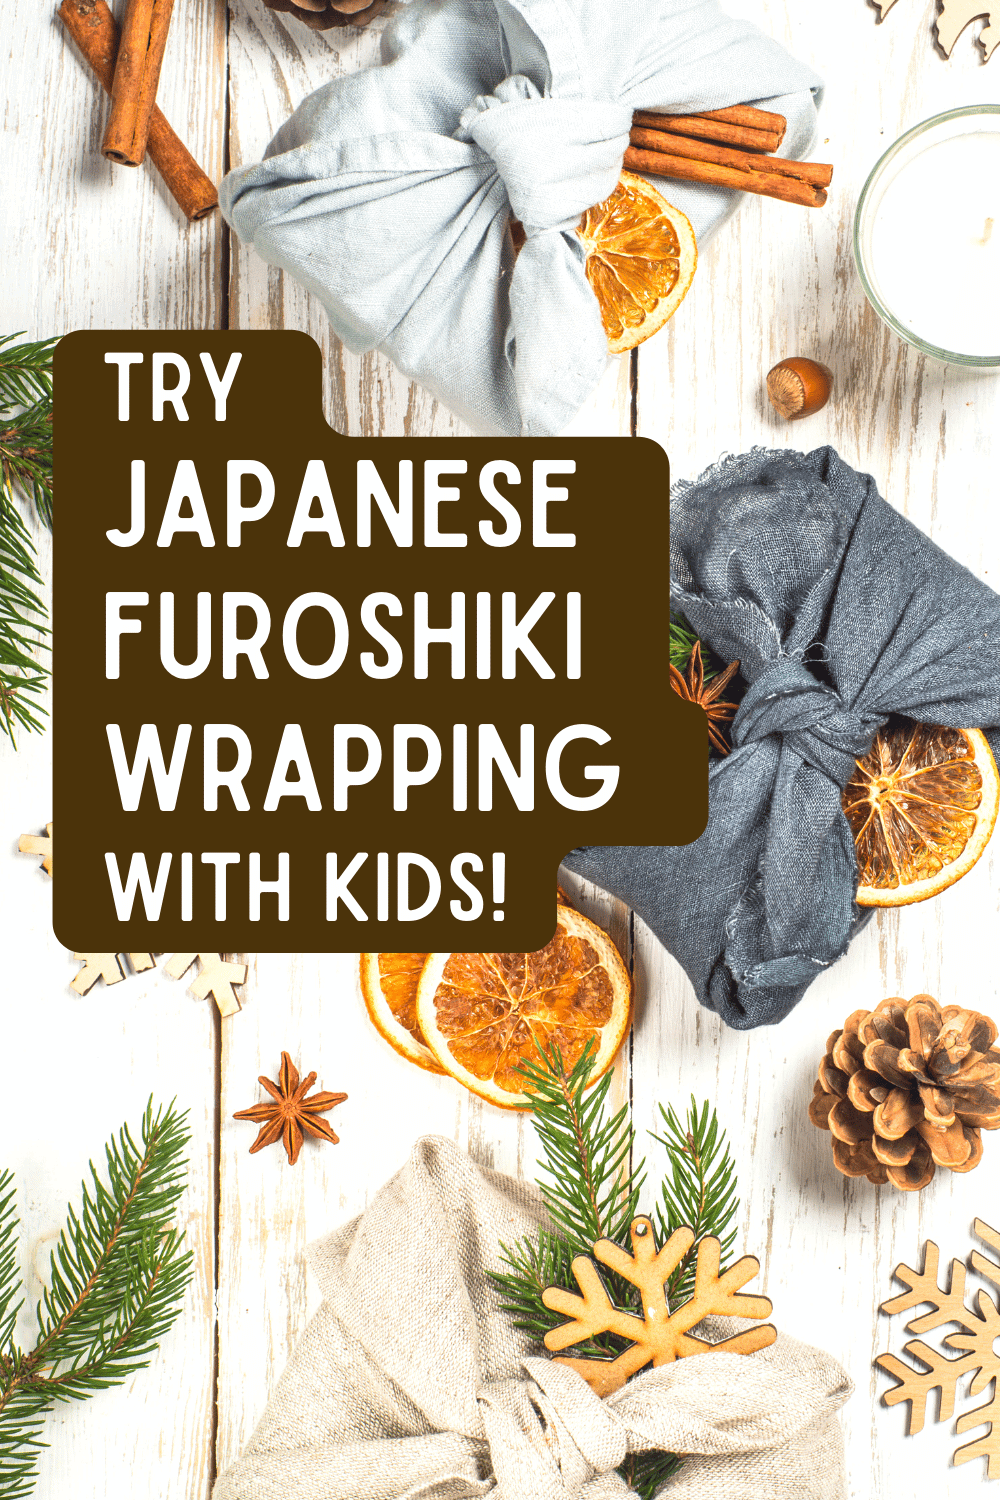 Japanese furoshiki wrapping cloths (how to furoshiki with kids) text over top down view of fabric wrapped presents on a white table with nature decorations like pinecones, dried oranges, and evergreen leaves